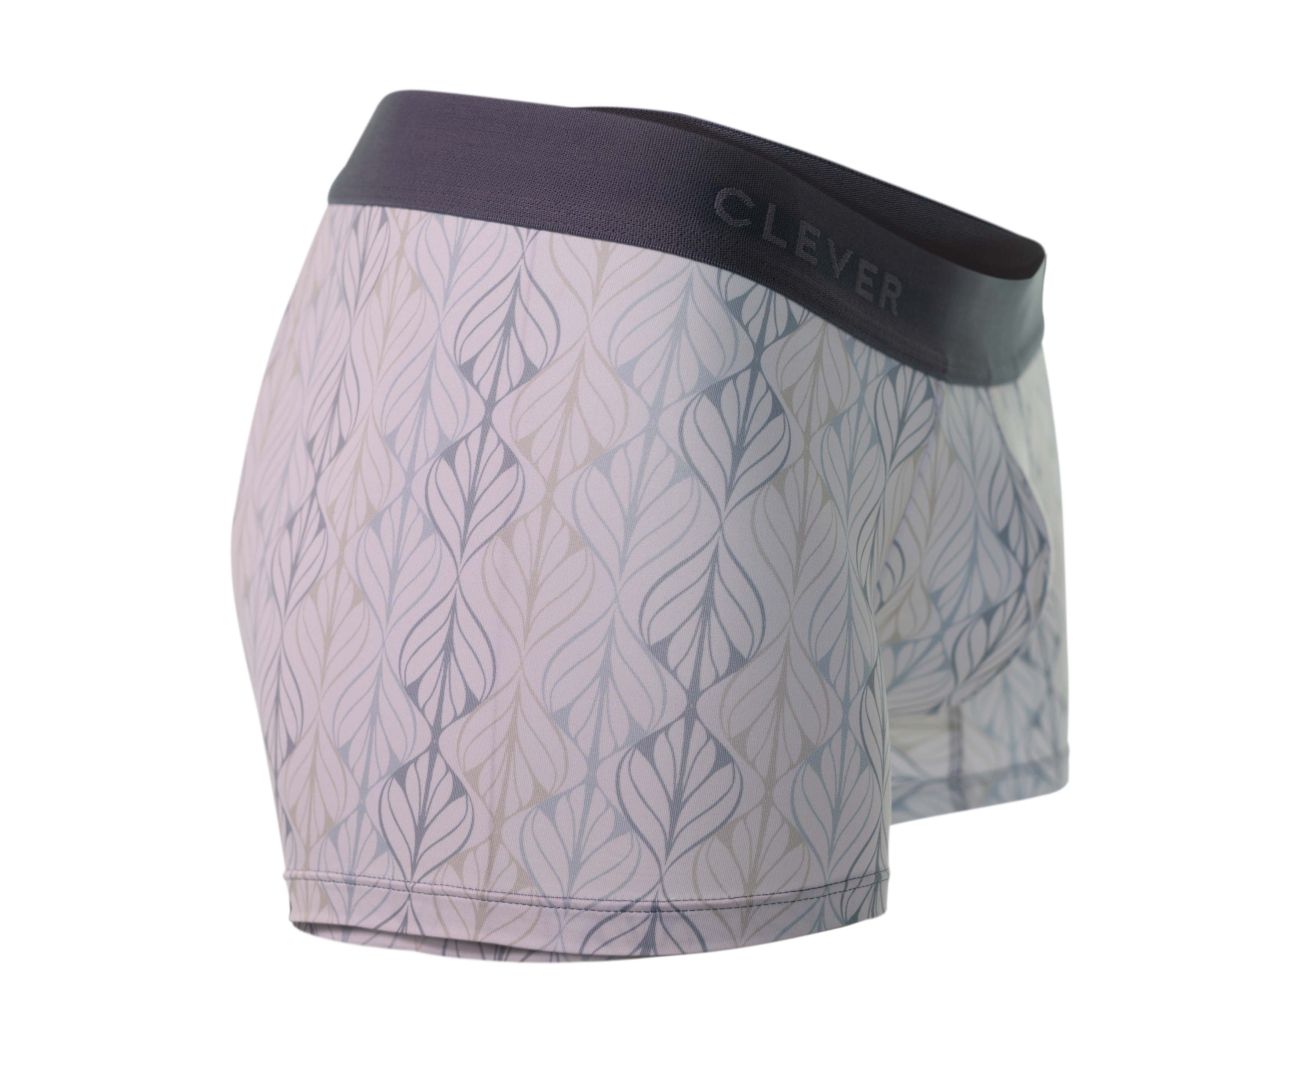 Clever 1050 Vaud Trunks